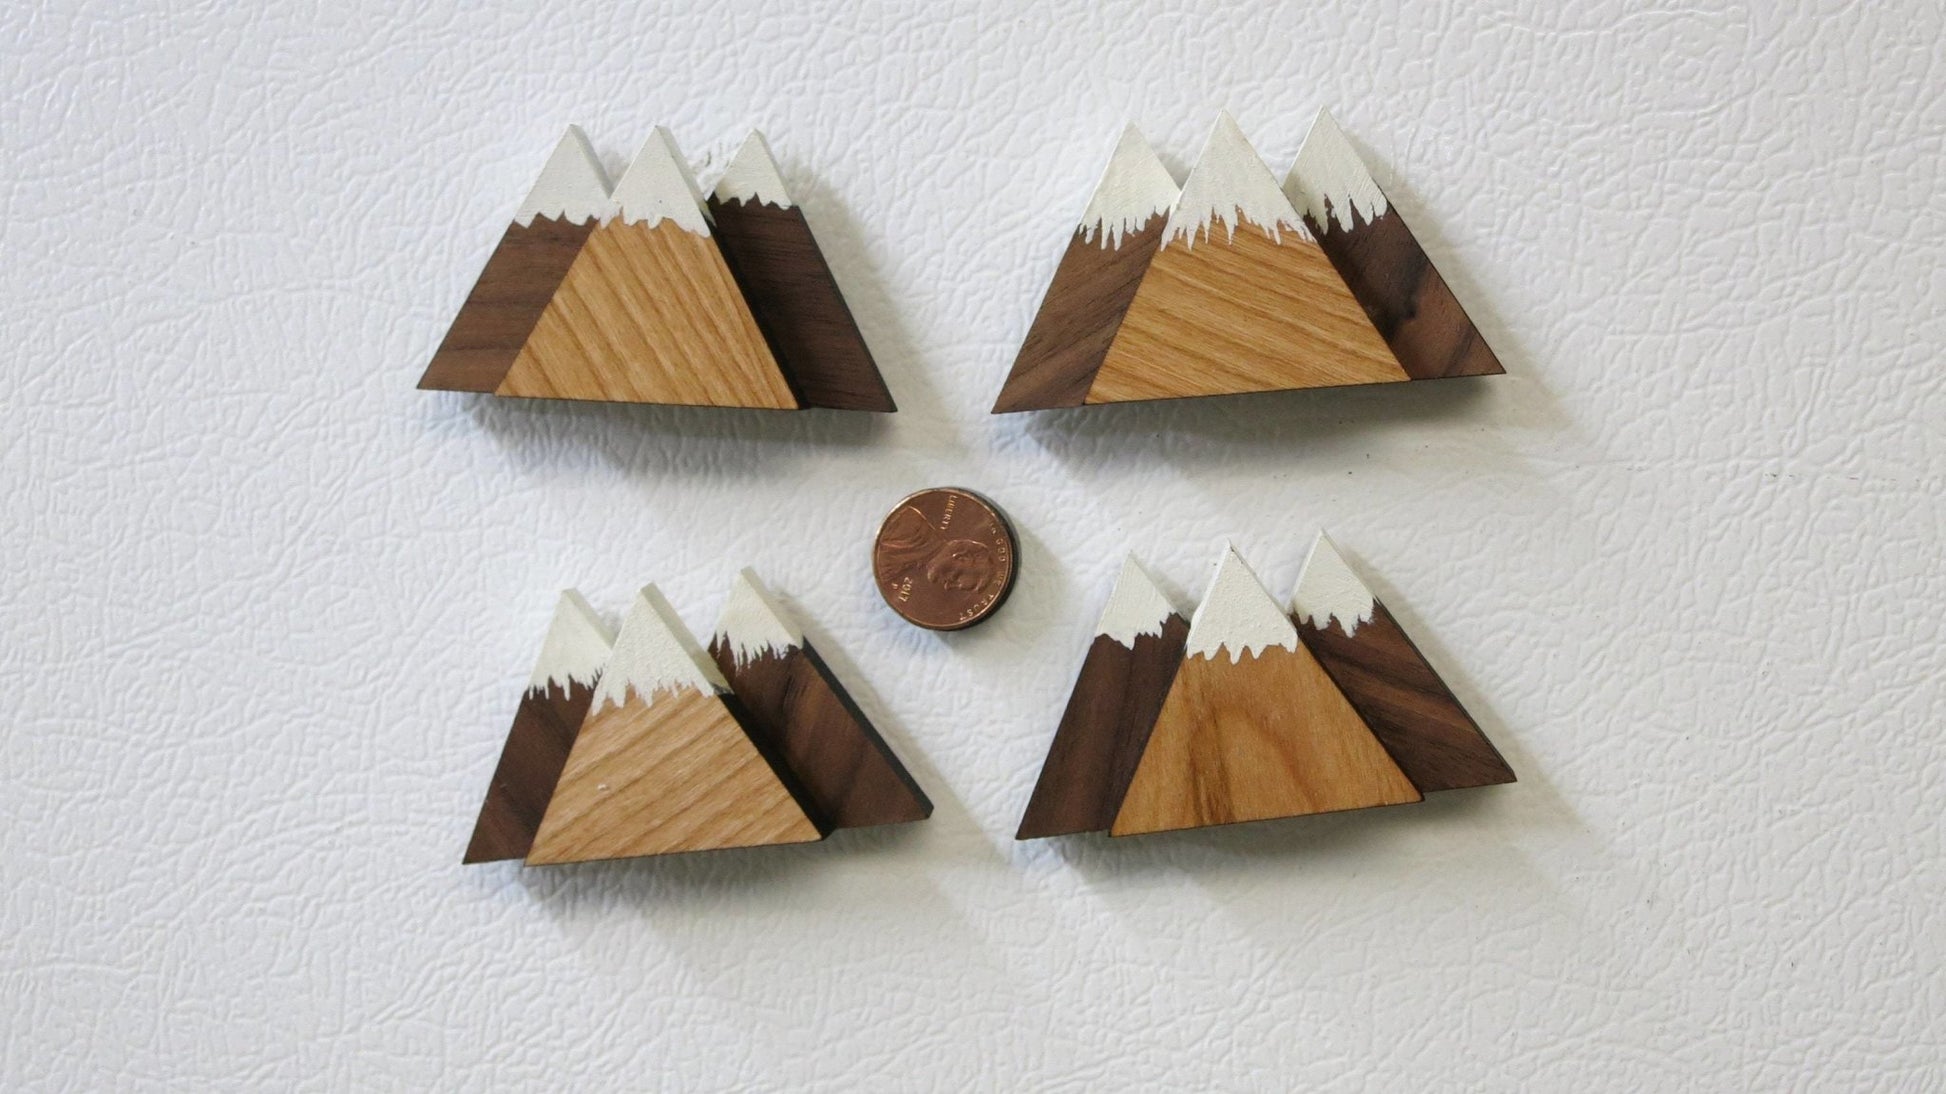 Mountain Range Magnets - Happy's Gifts and Apparel